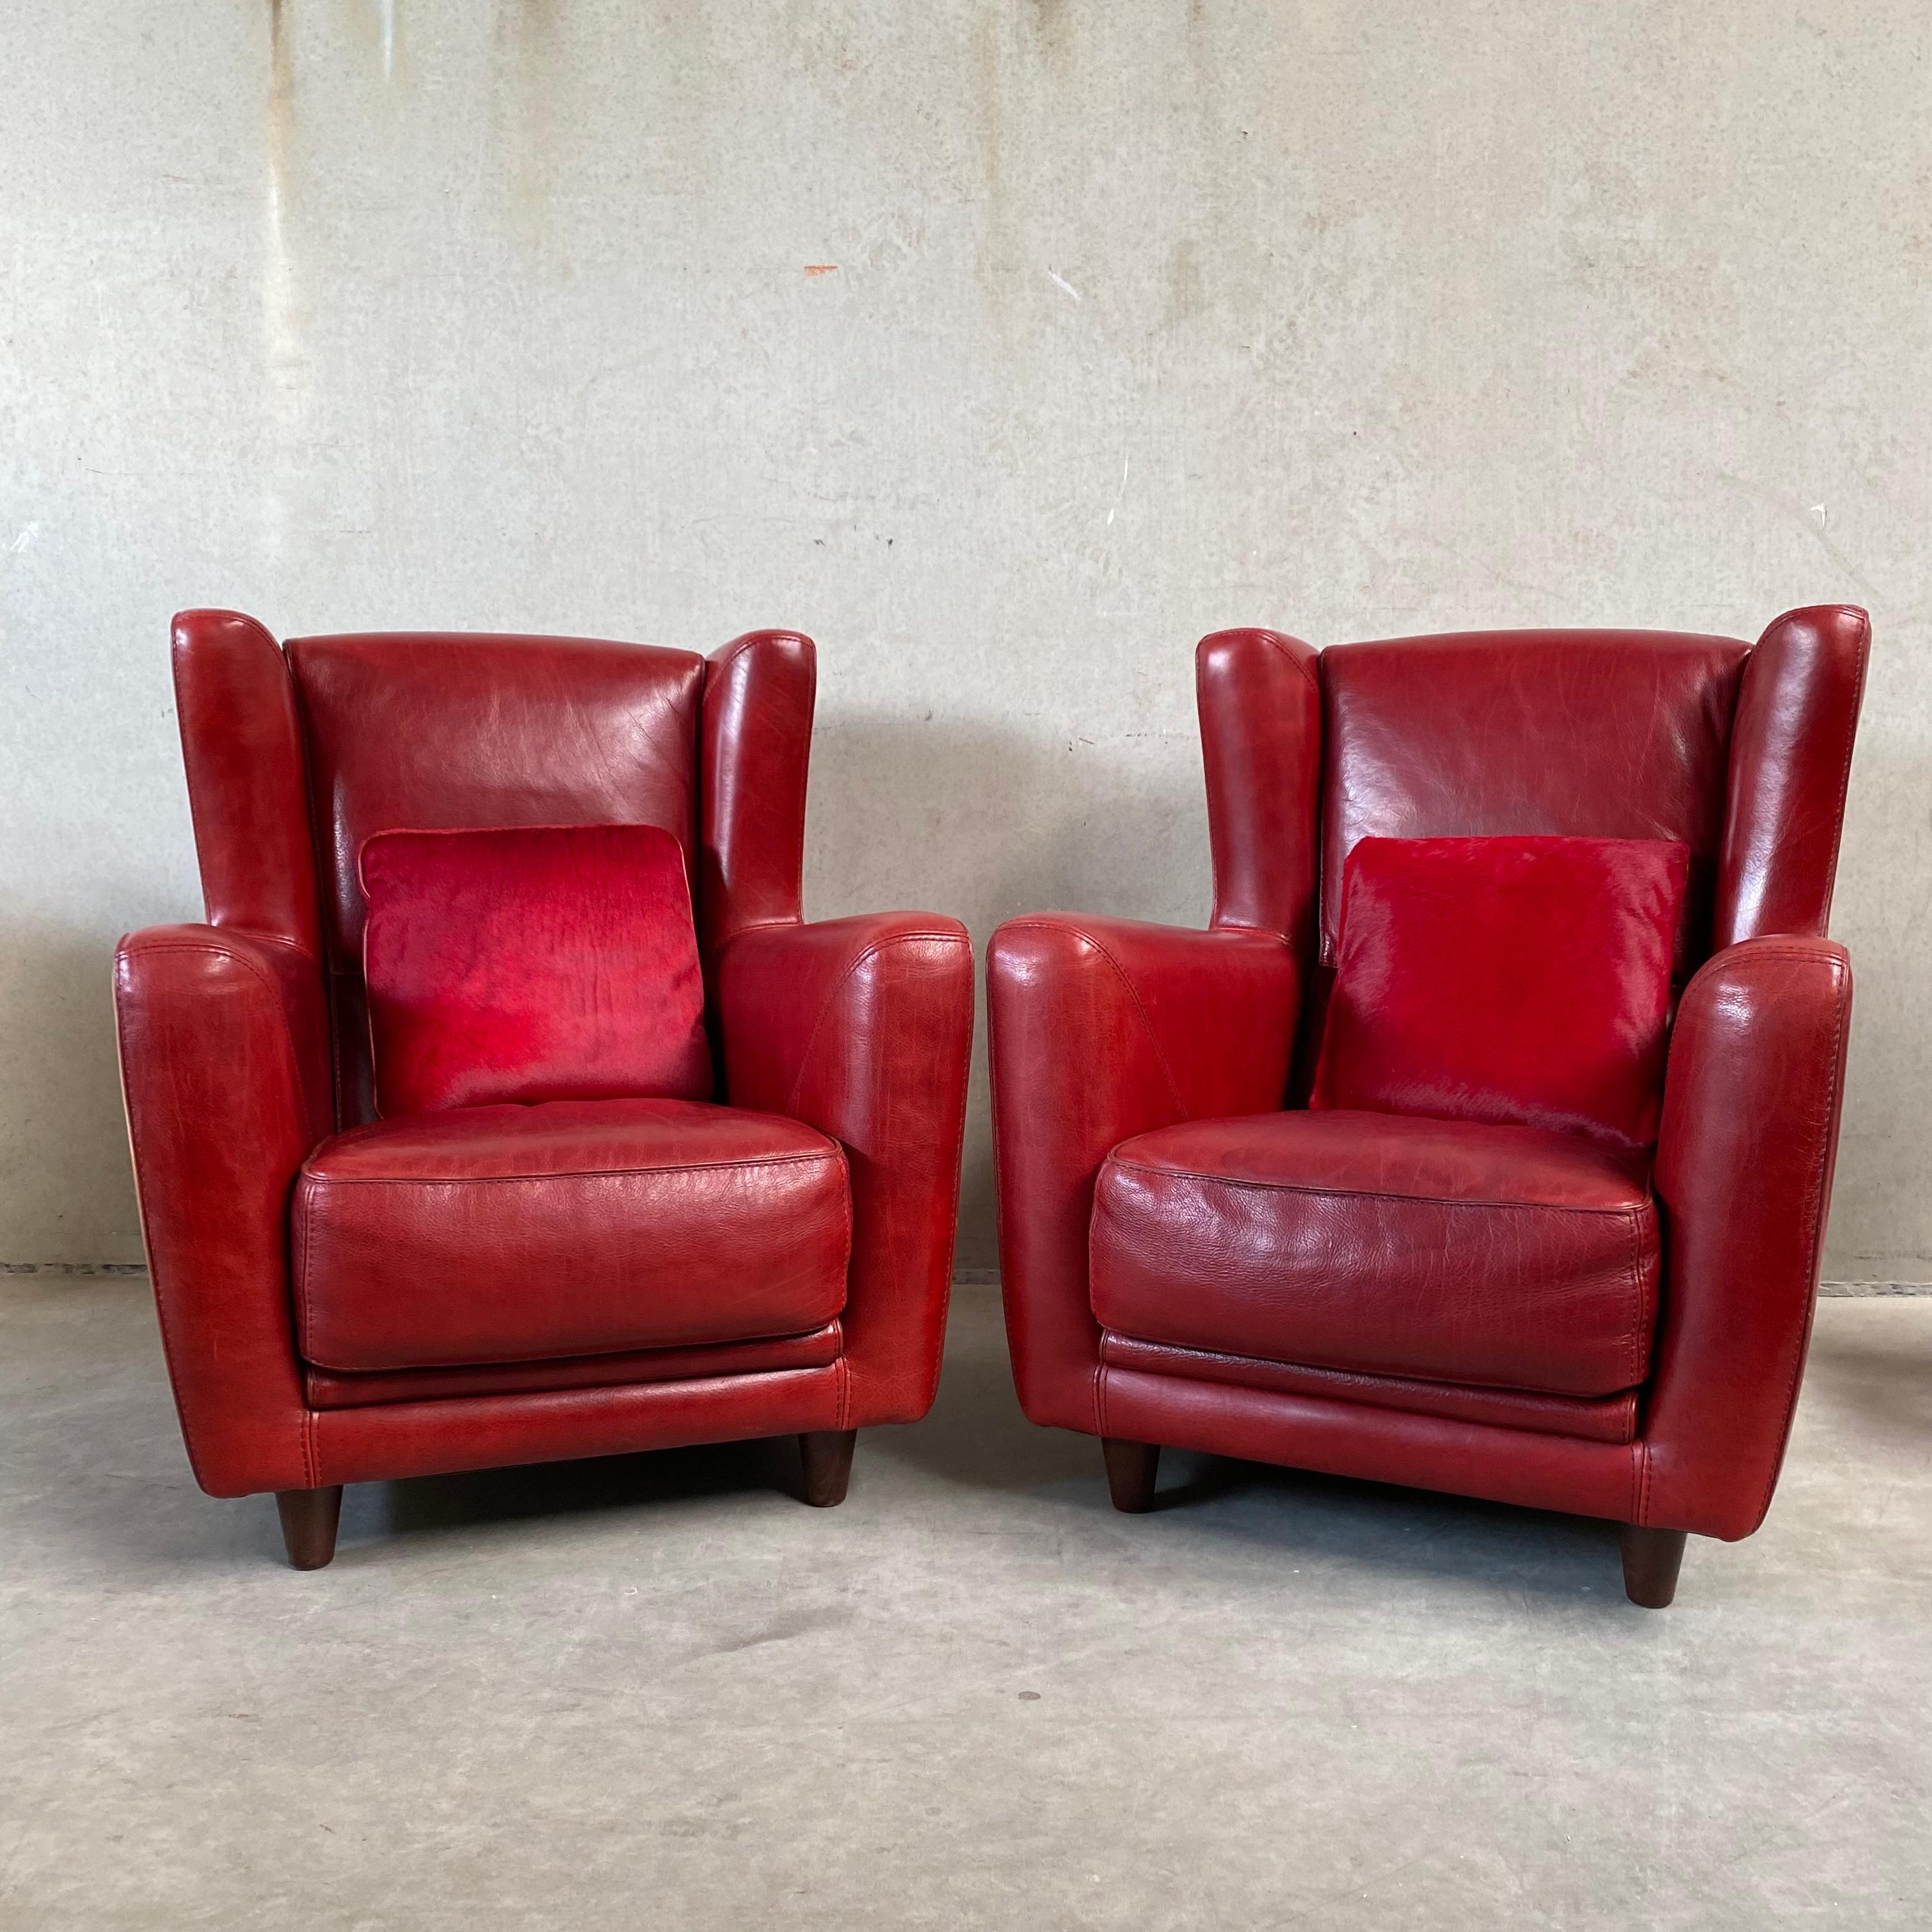 Pair of Ox-Blood Red Leather Lounge Chairs Begére by Baxter Italy 90s For Sale 7